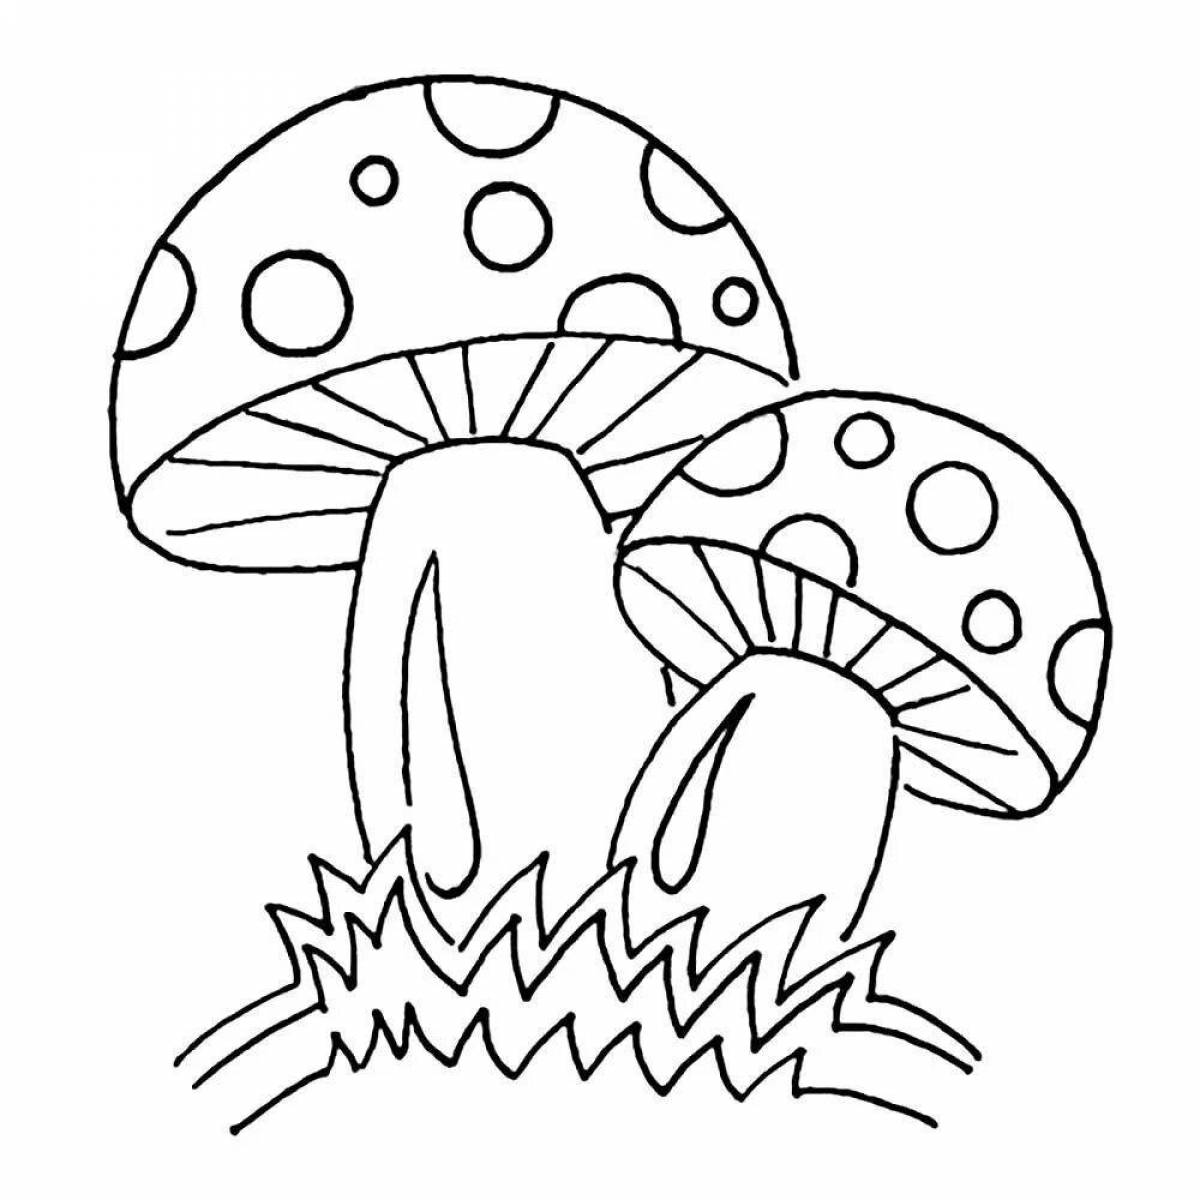 Perfect drawing of fly agarics for schoolchildren